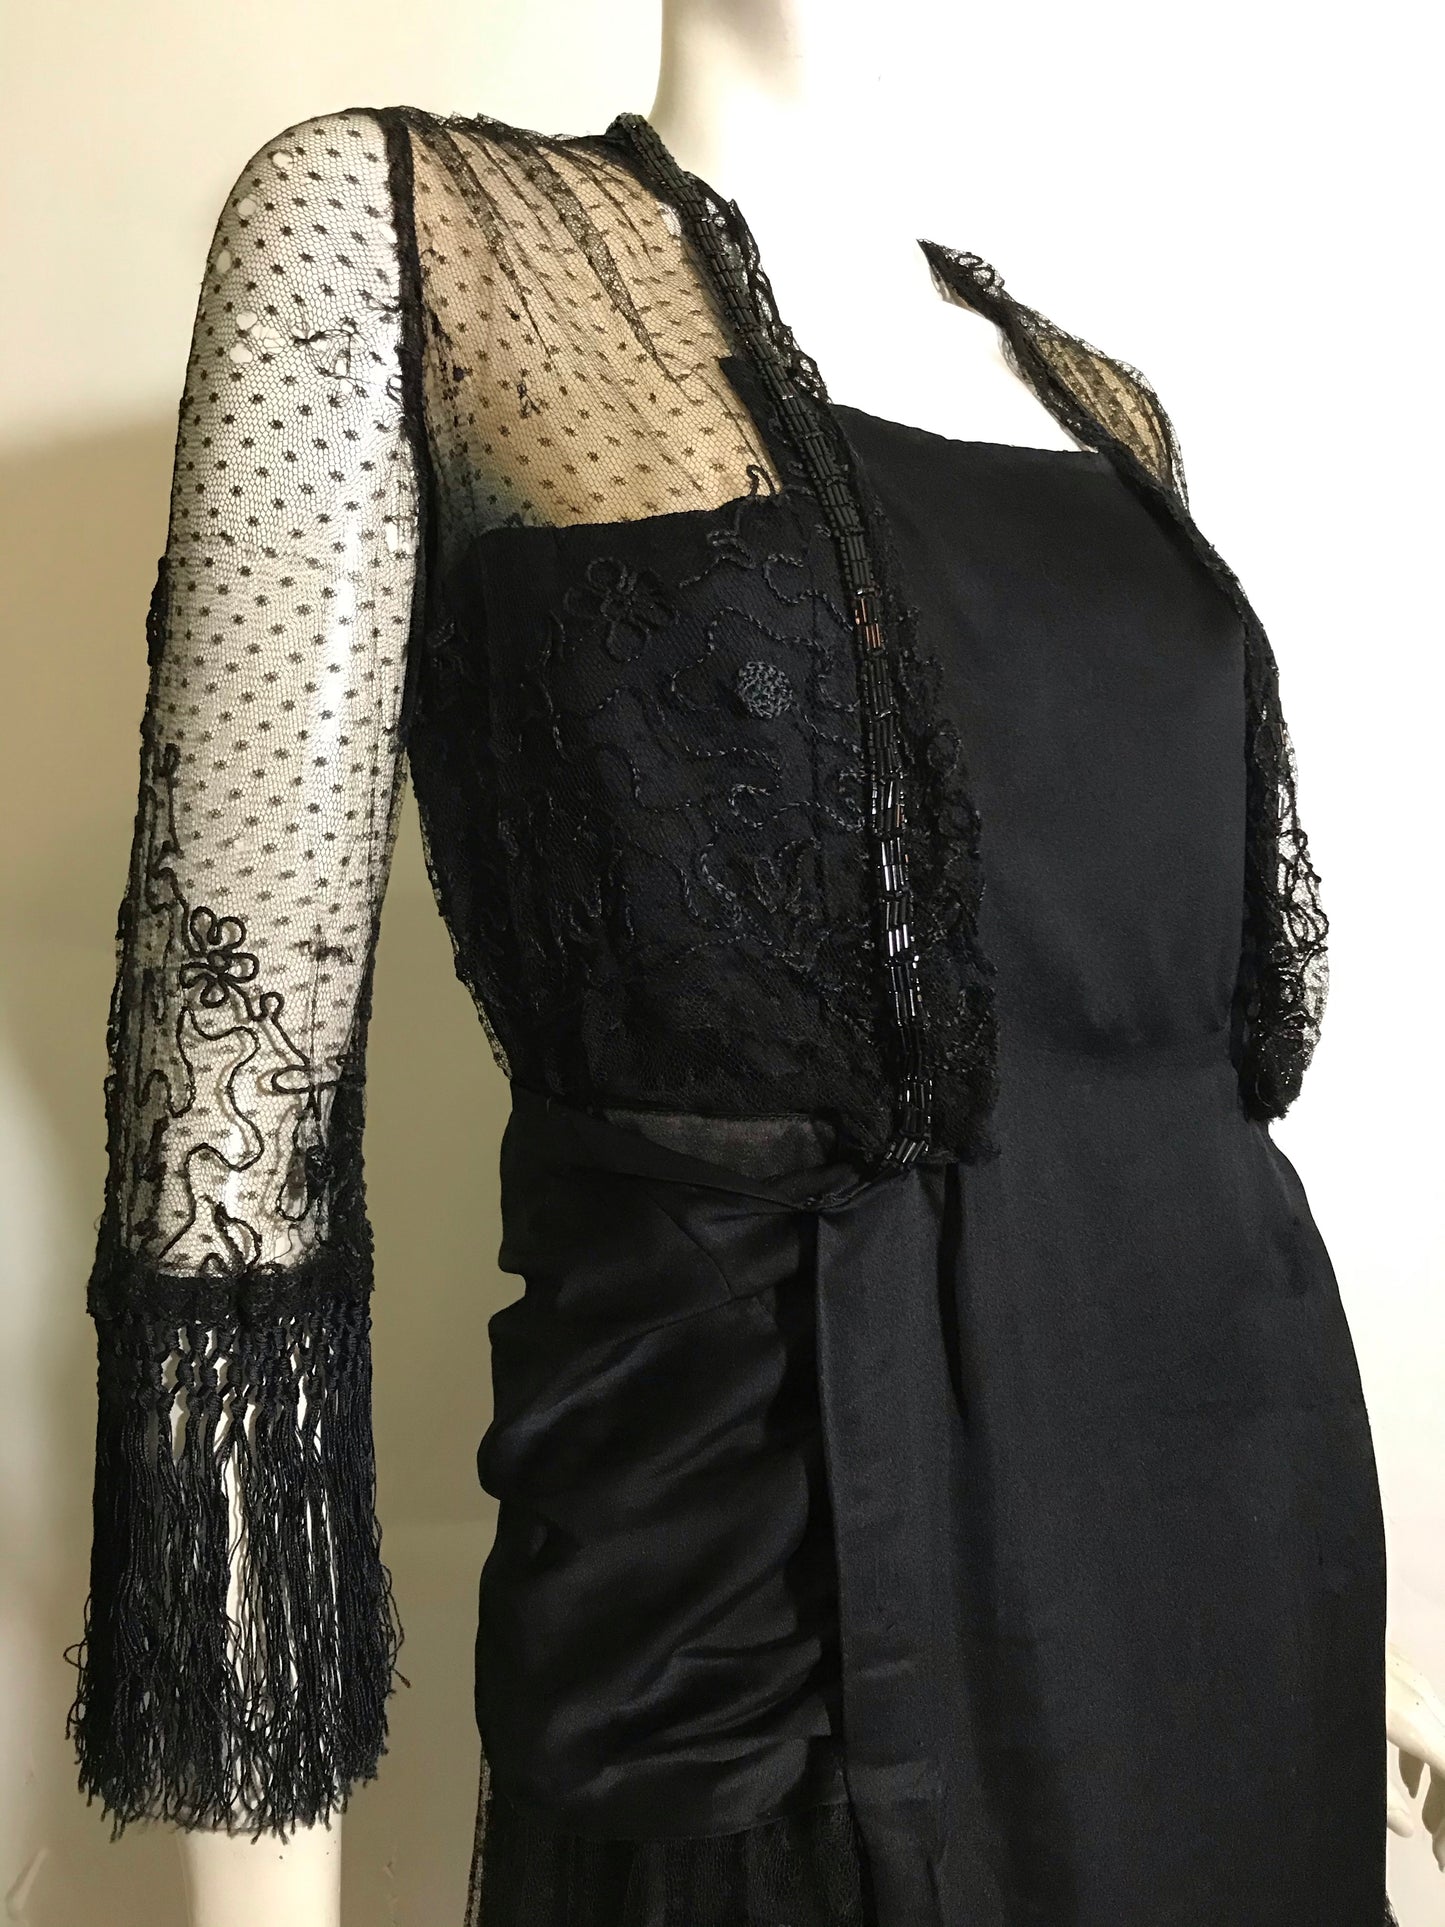 Elaborate Ink Black Silk Formal Dress with Beading Lace and Long Fringe circa 1910s